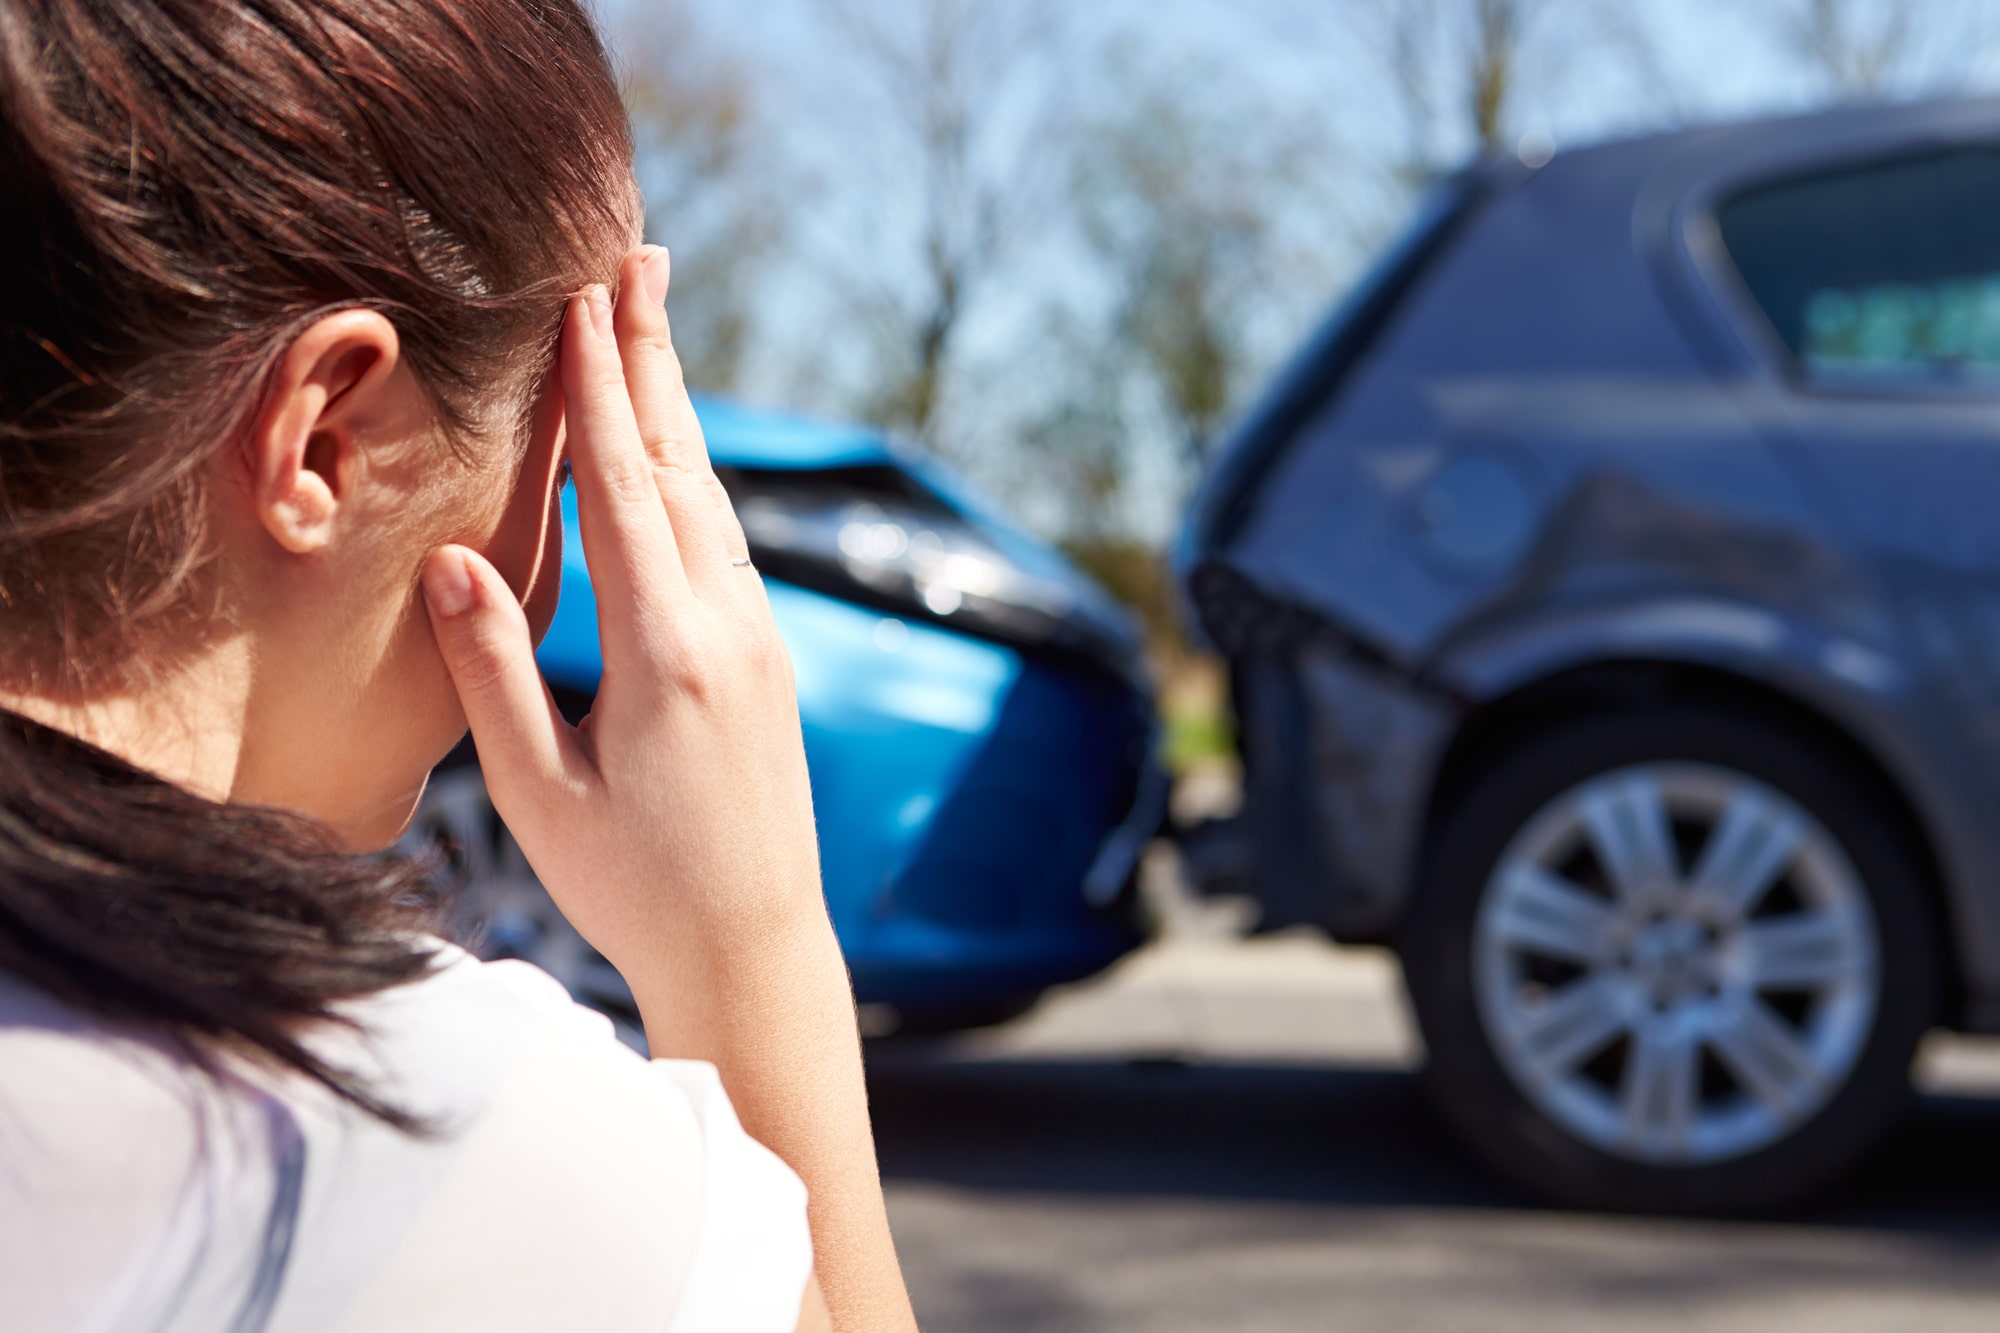 Common Questions For Calculating Damages After A Car Accident